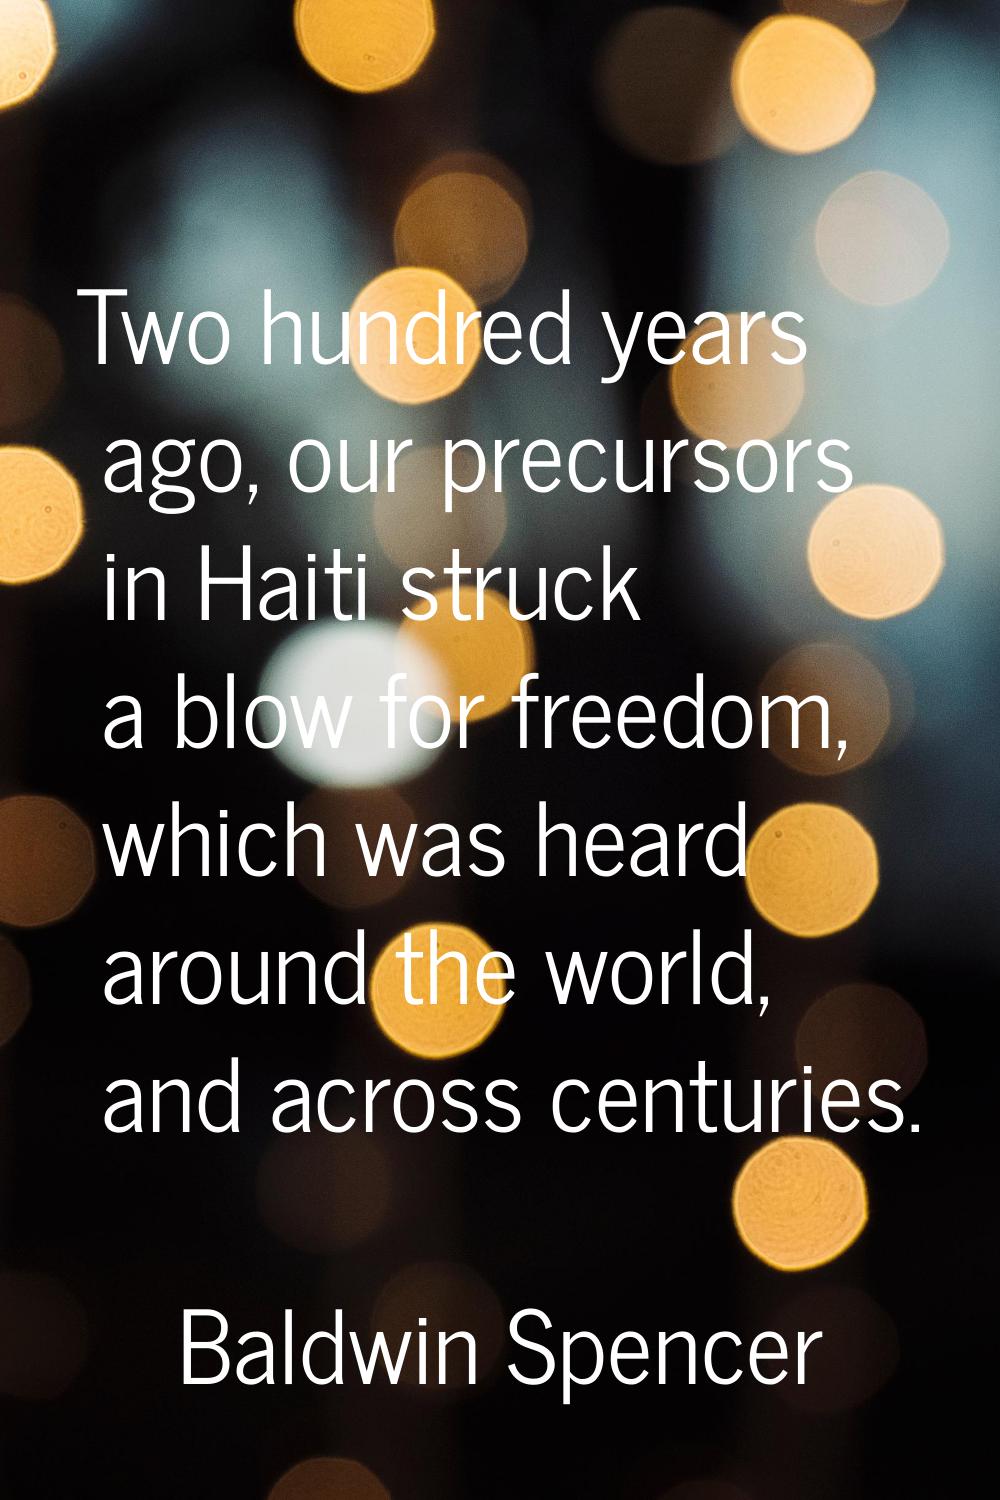 Two hundred years ago, our precursors in Haiti struck a blow for freedom, which was heard around th